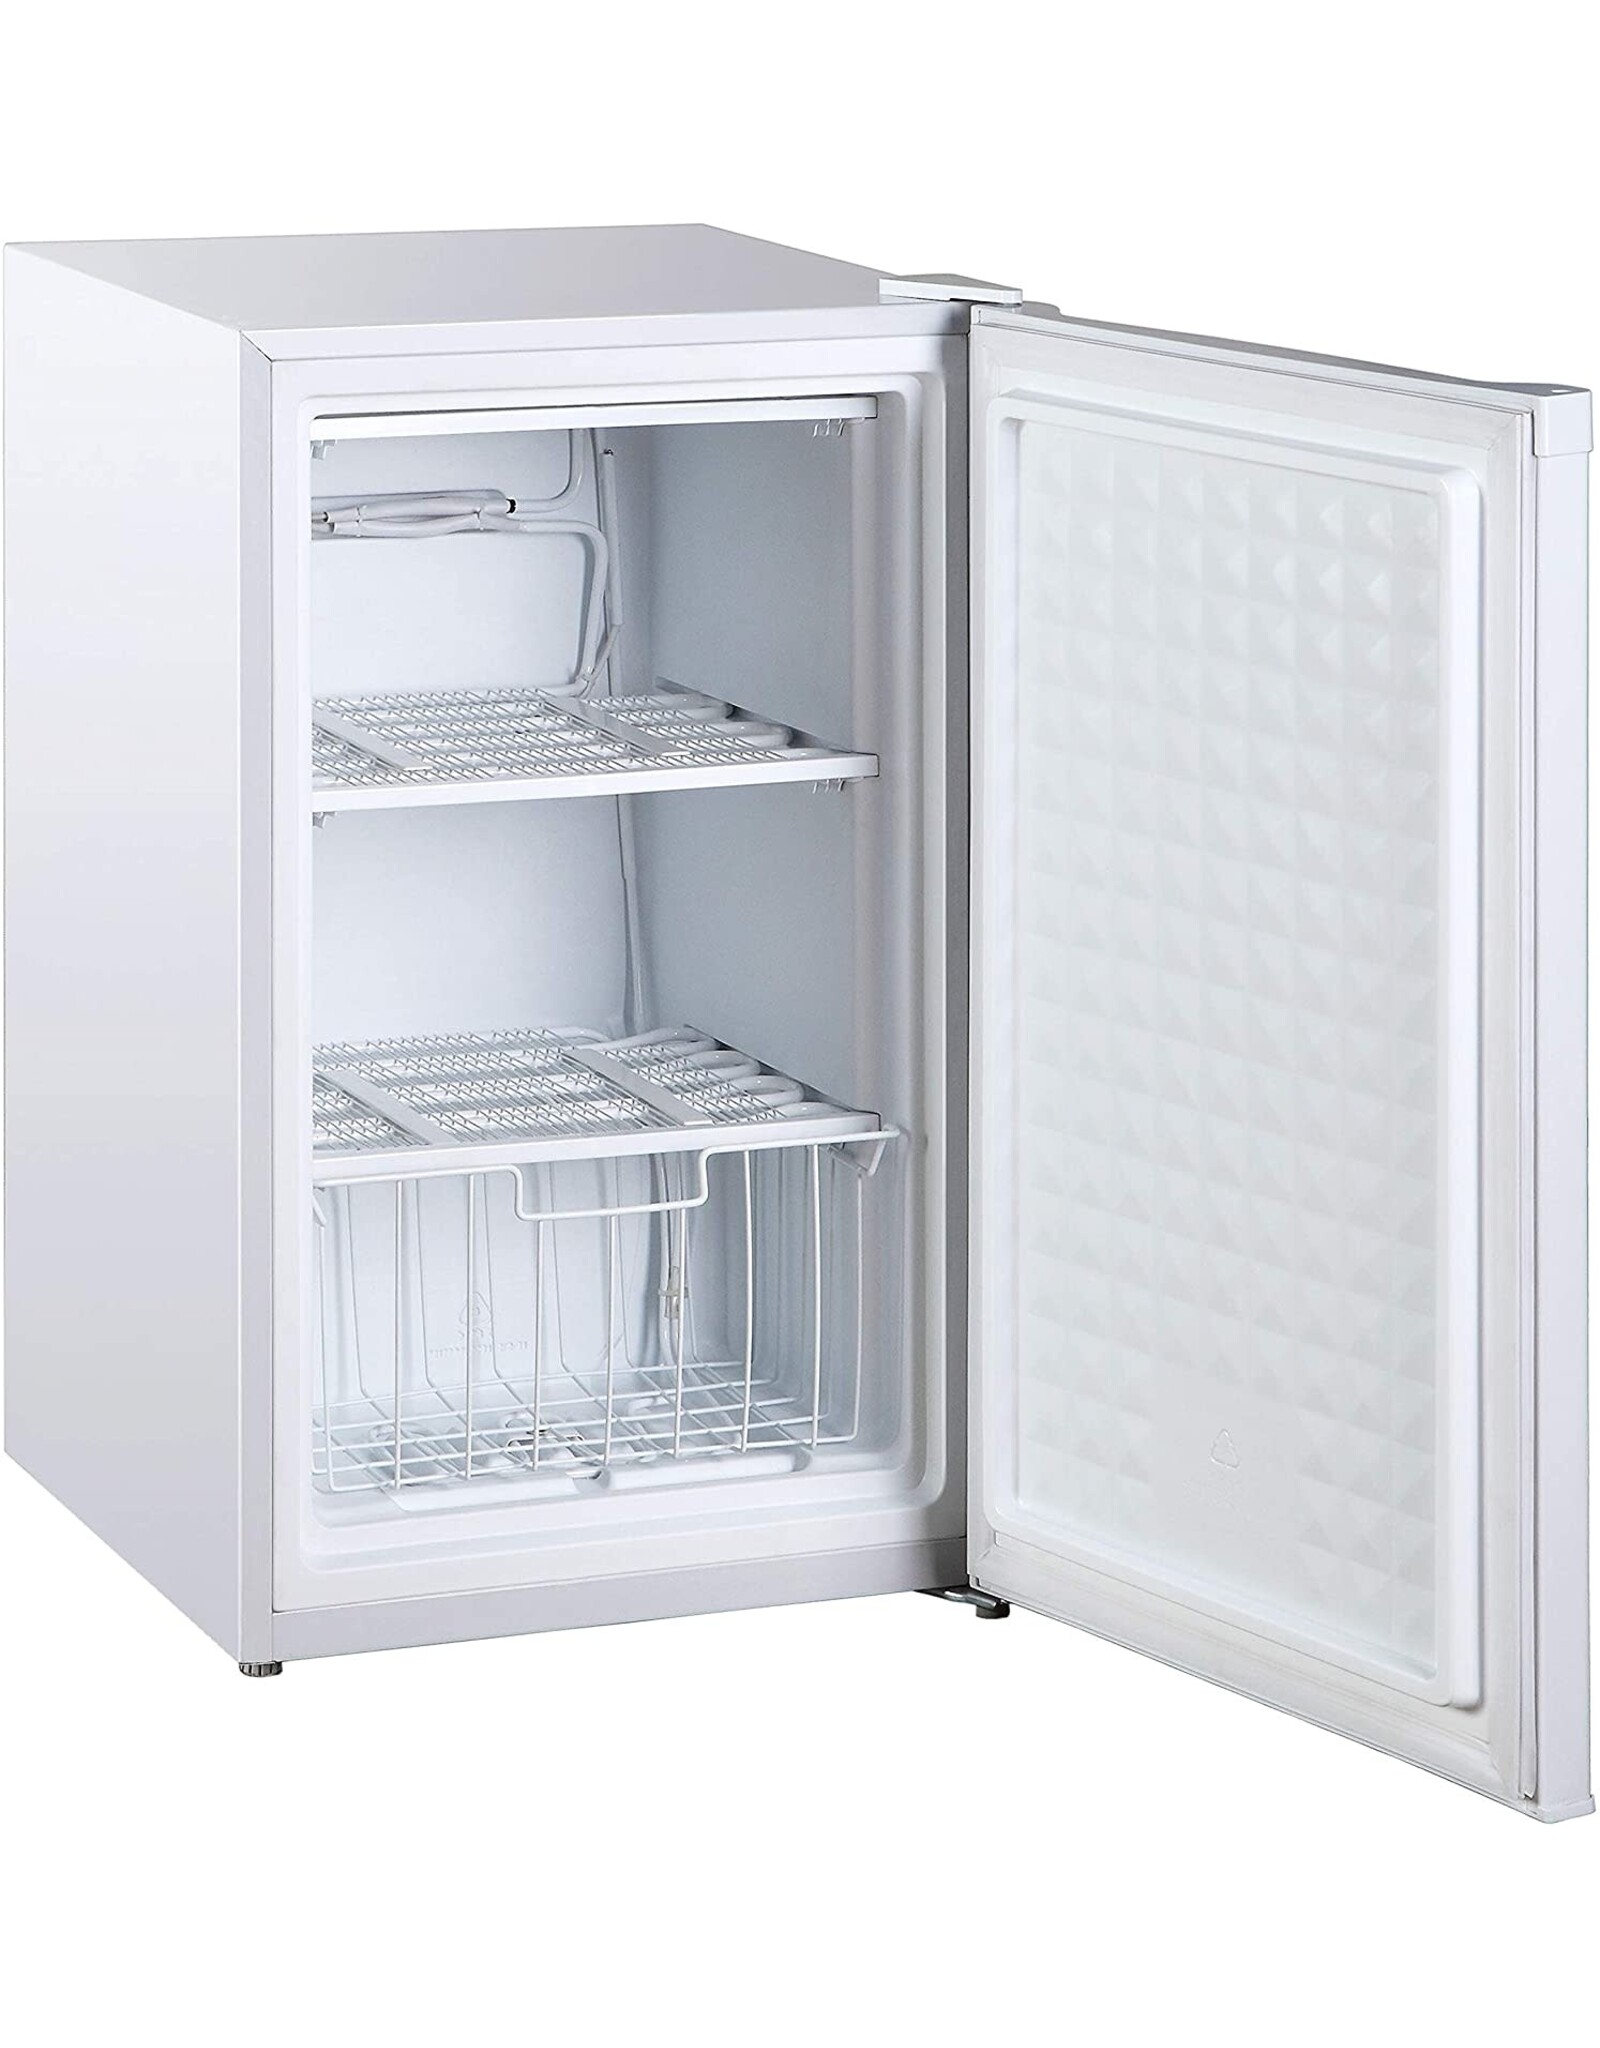 Compact Cooling Companion: Midea WHS-109FW1 Chest Freezer for Limited Spaces